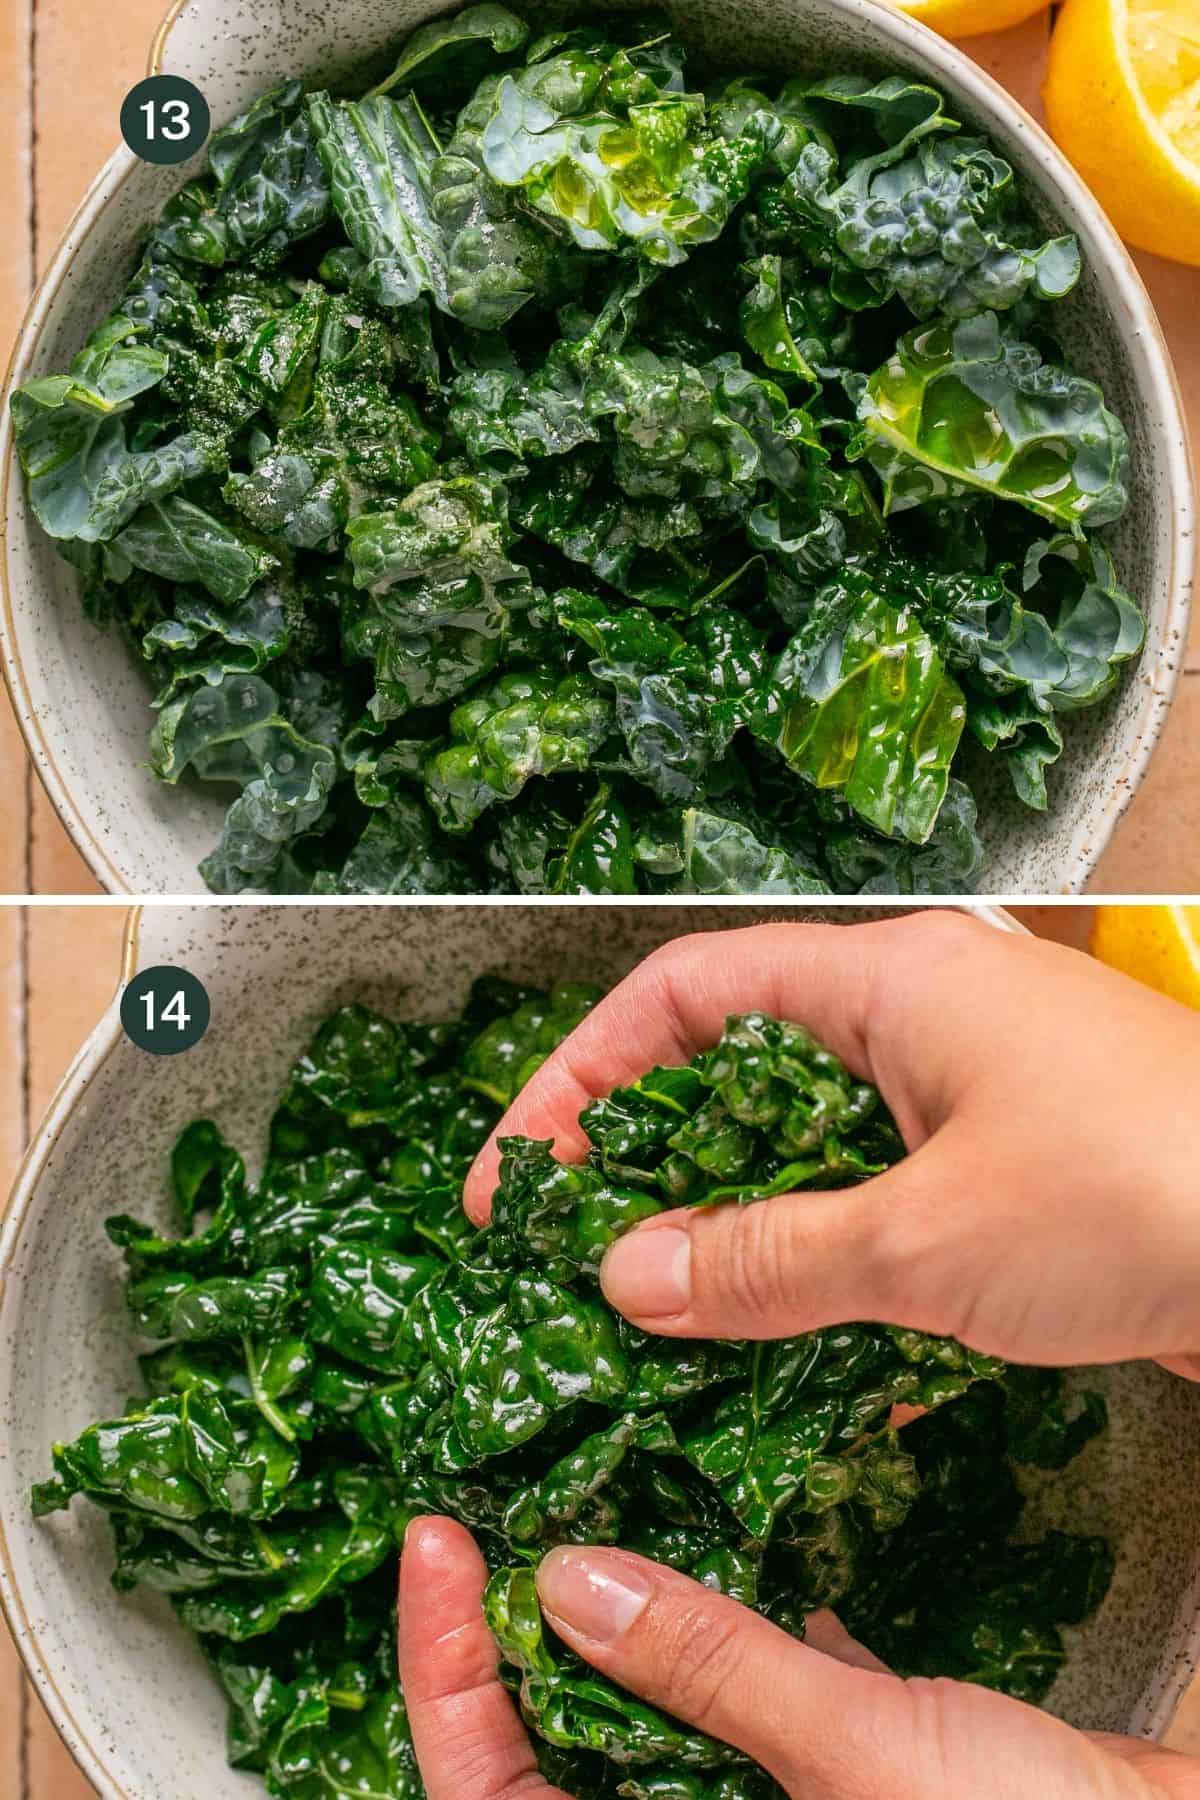 Two images showing how to massage kale down to remove bitterness with olive oil and hands. 